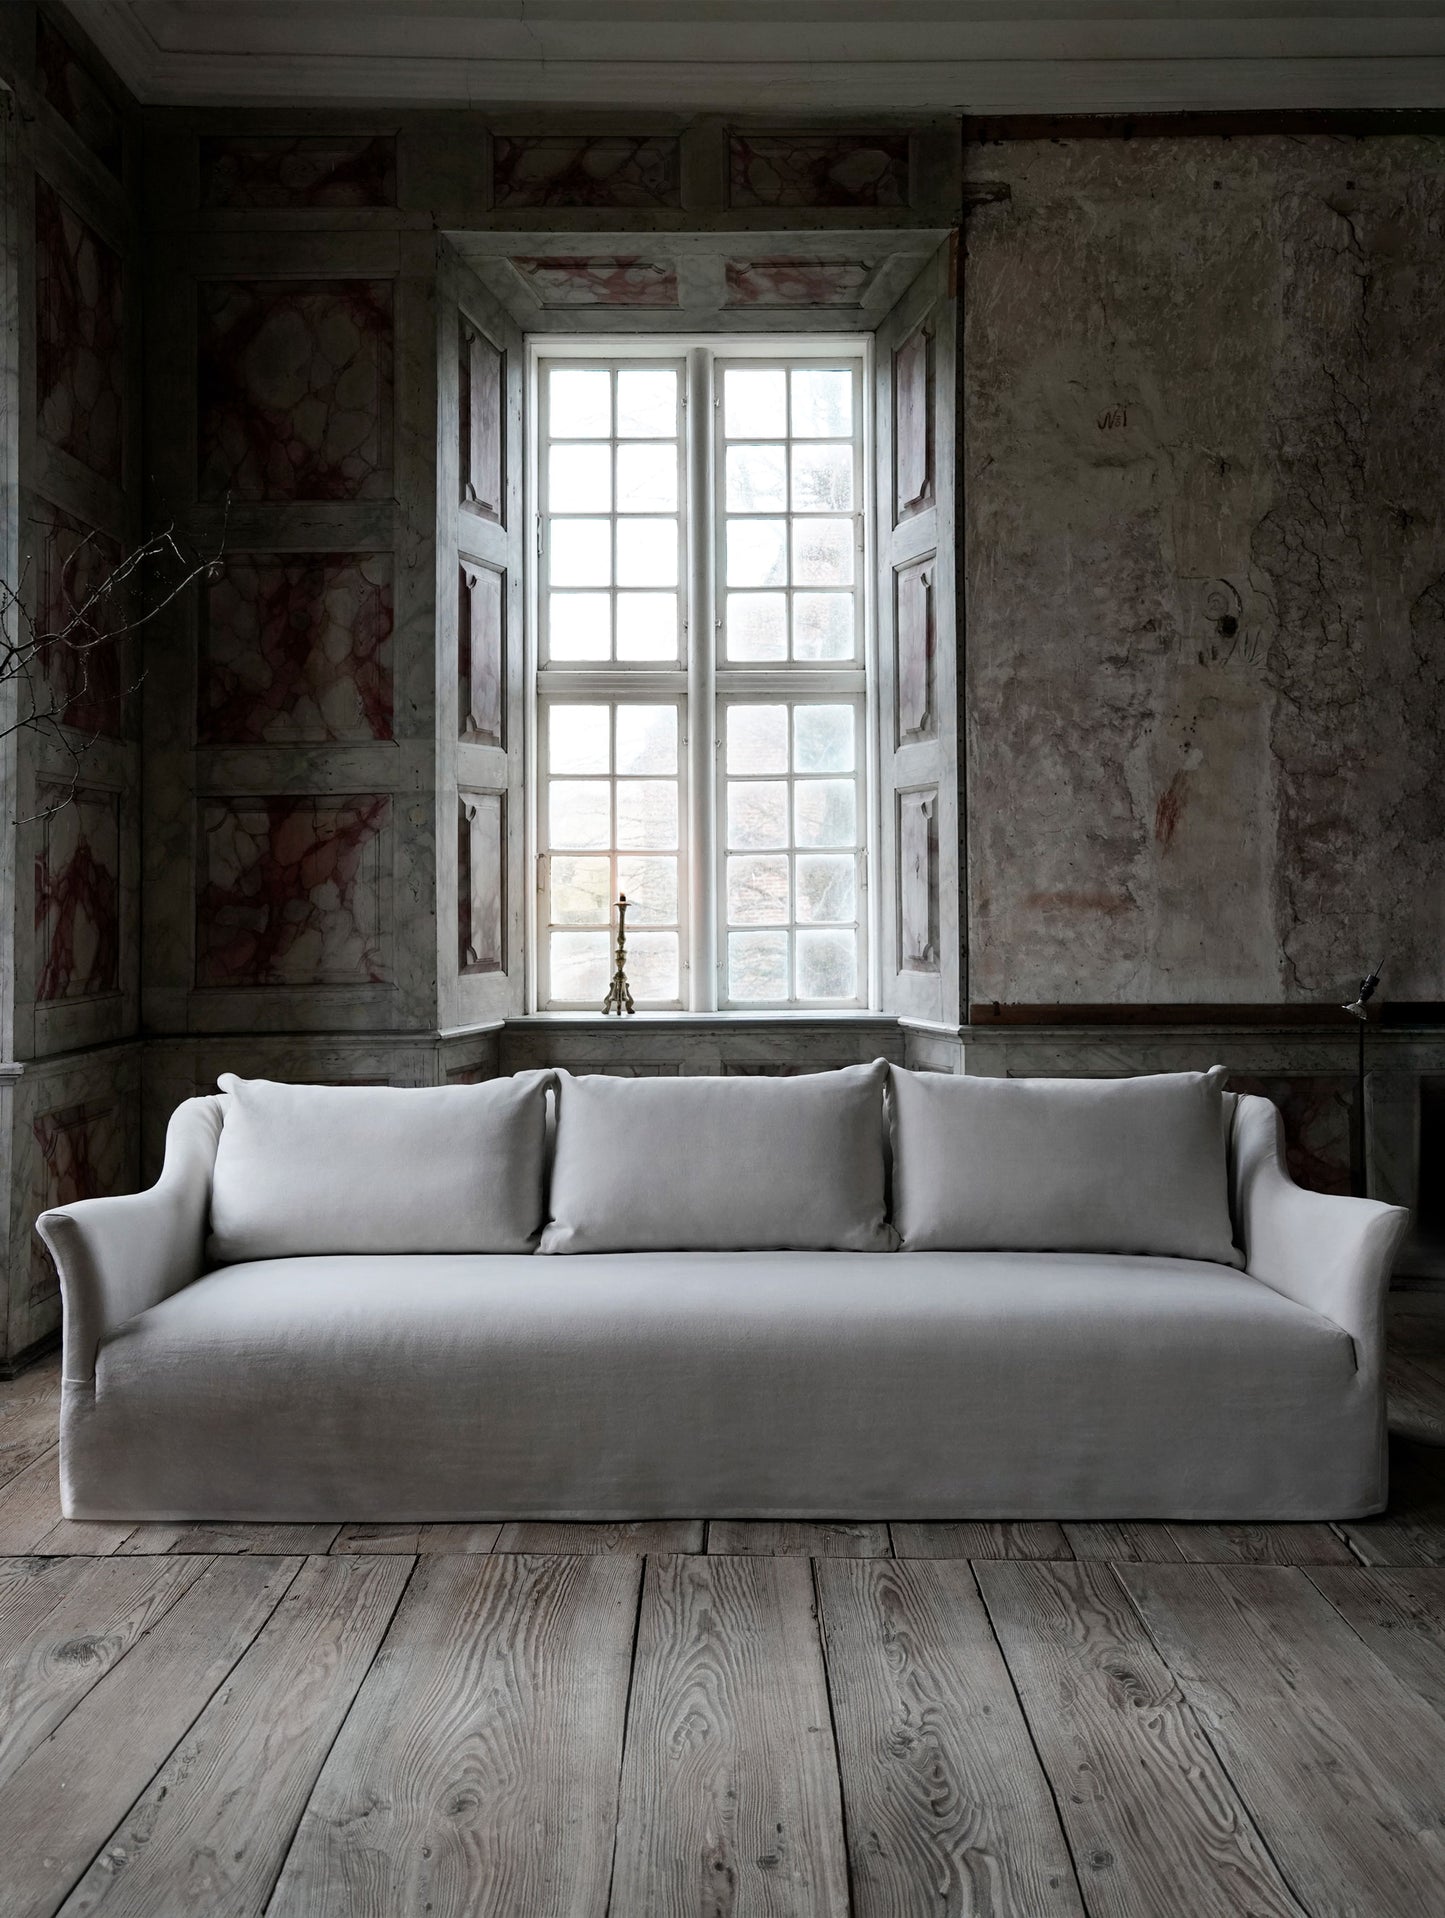 "CLASSIC SOFA WITH FIXED SEAT" BY OLIVER GUSTAV